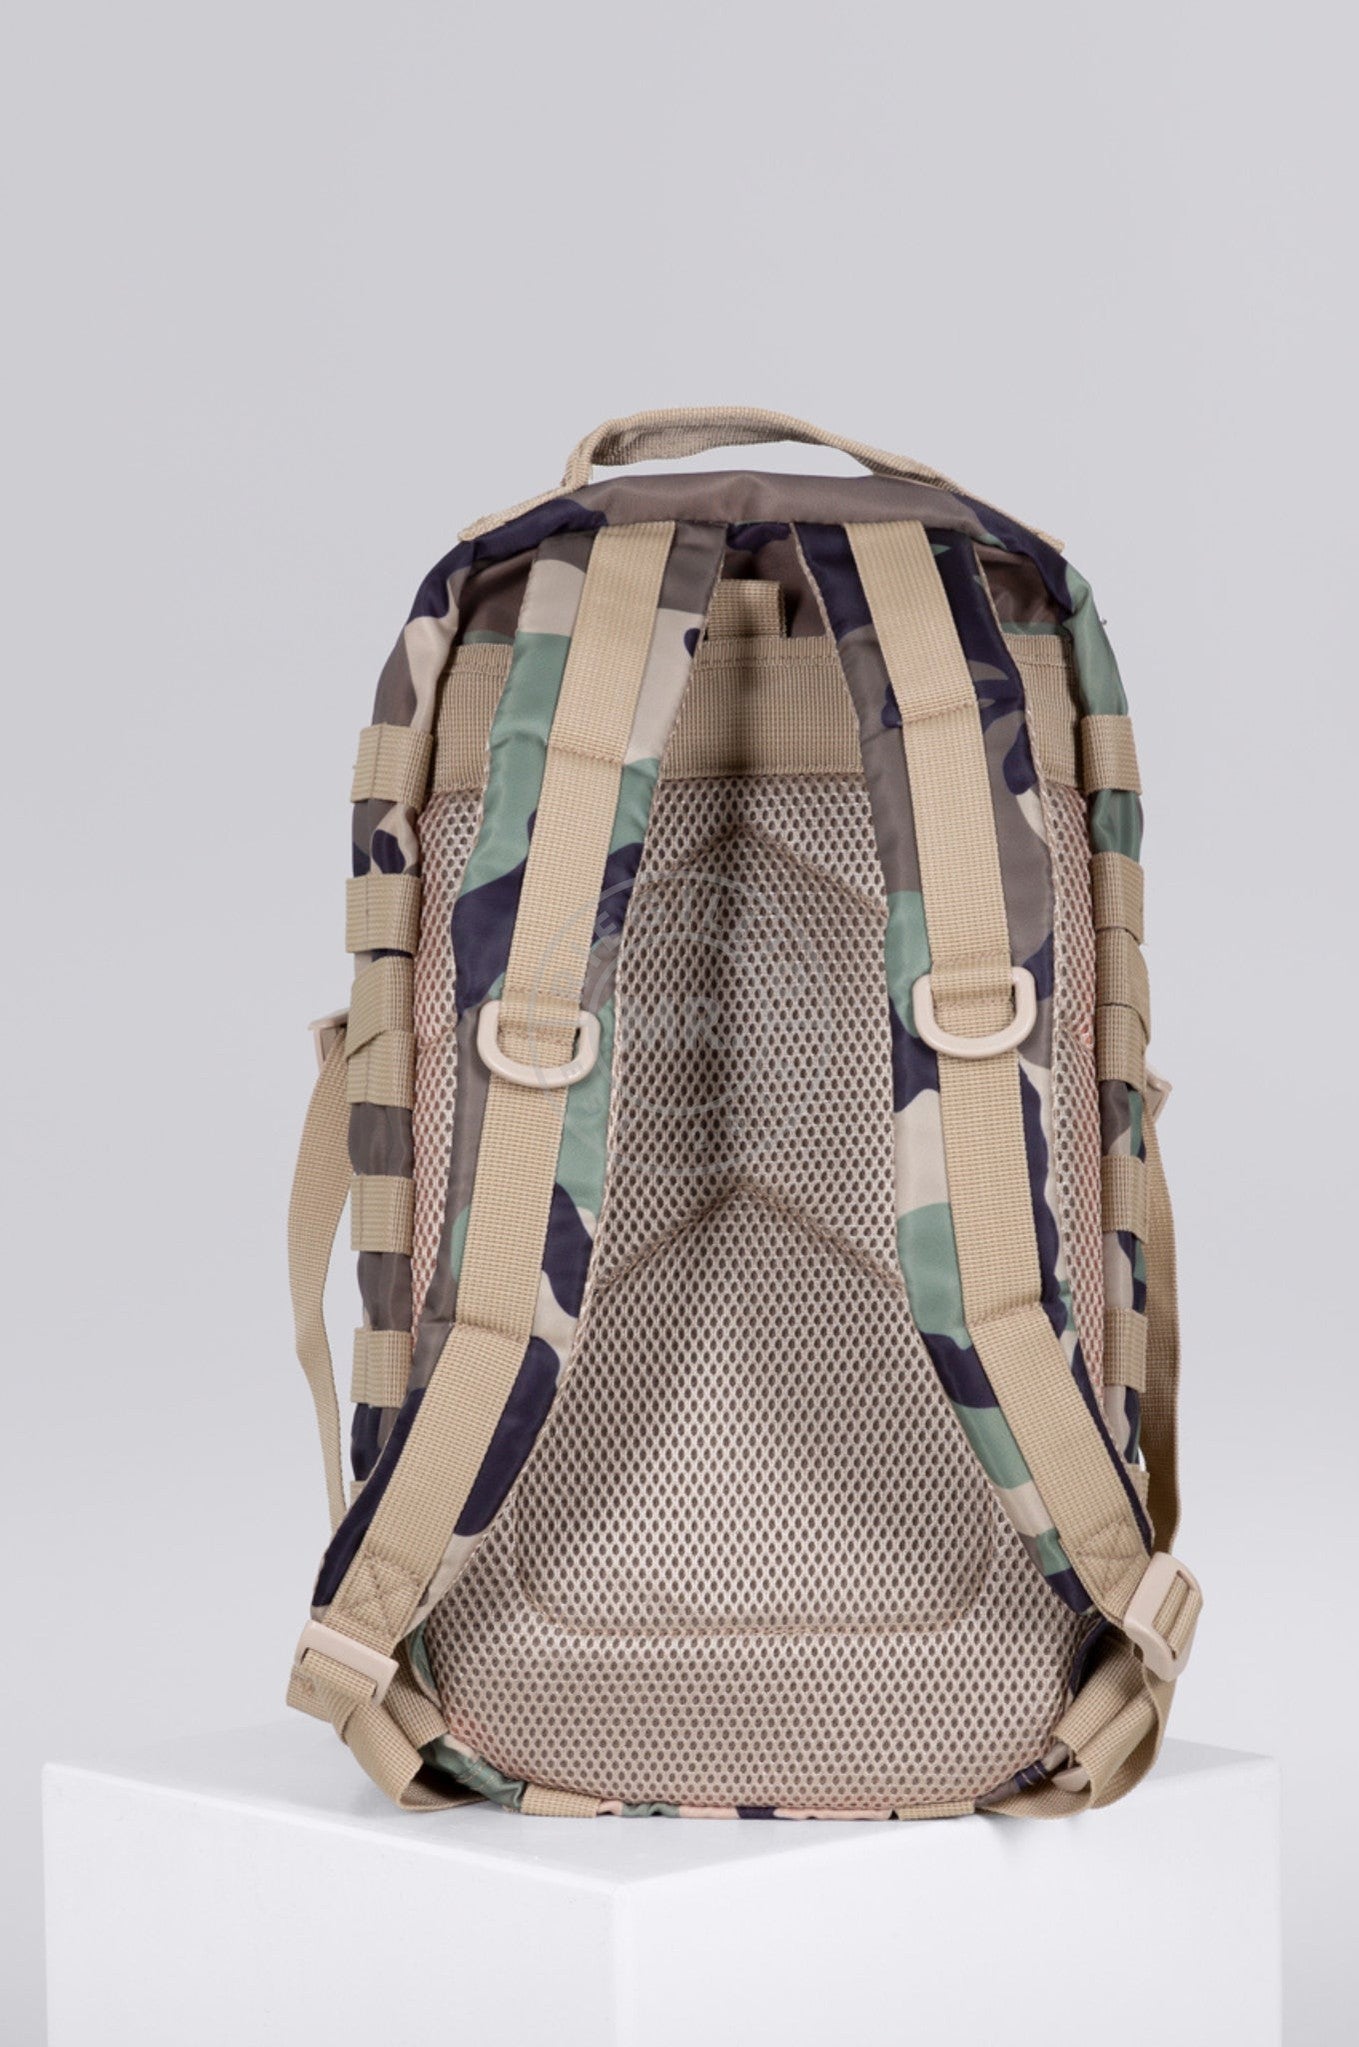 Alpha Industries Tactical Backpack - WDL Camo-at MR. Riegillio